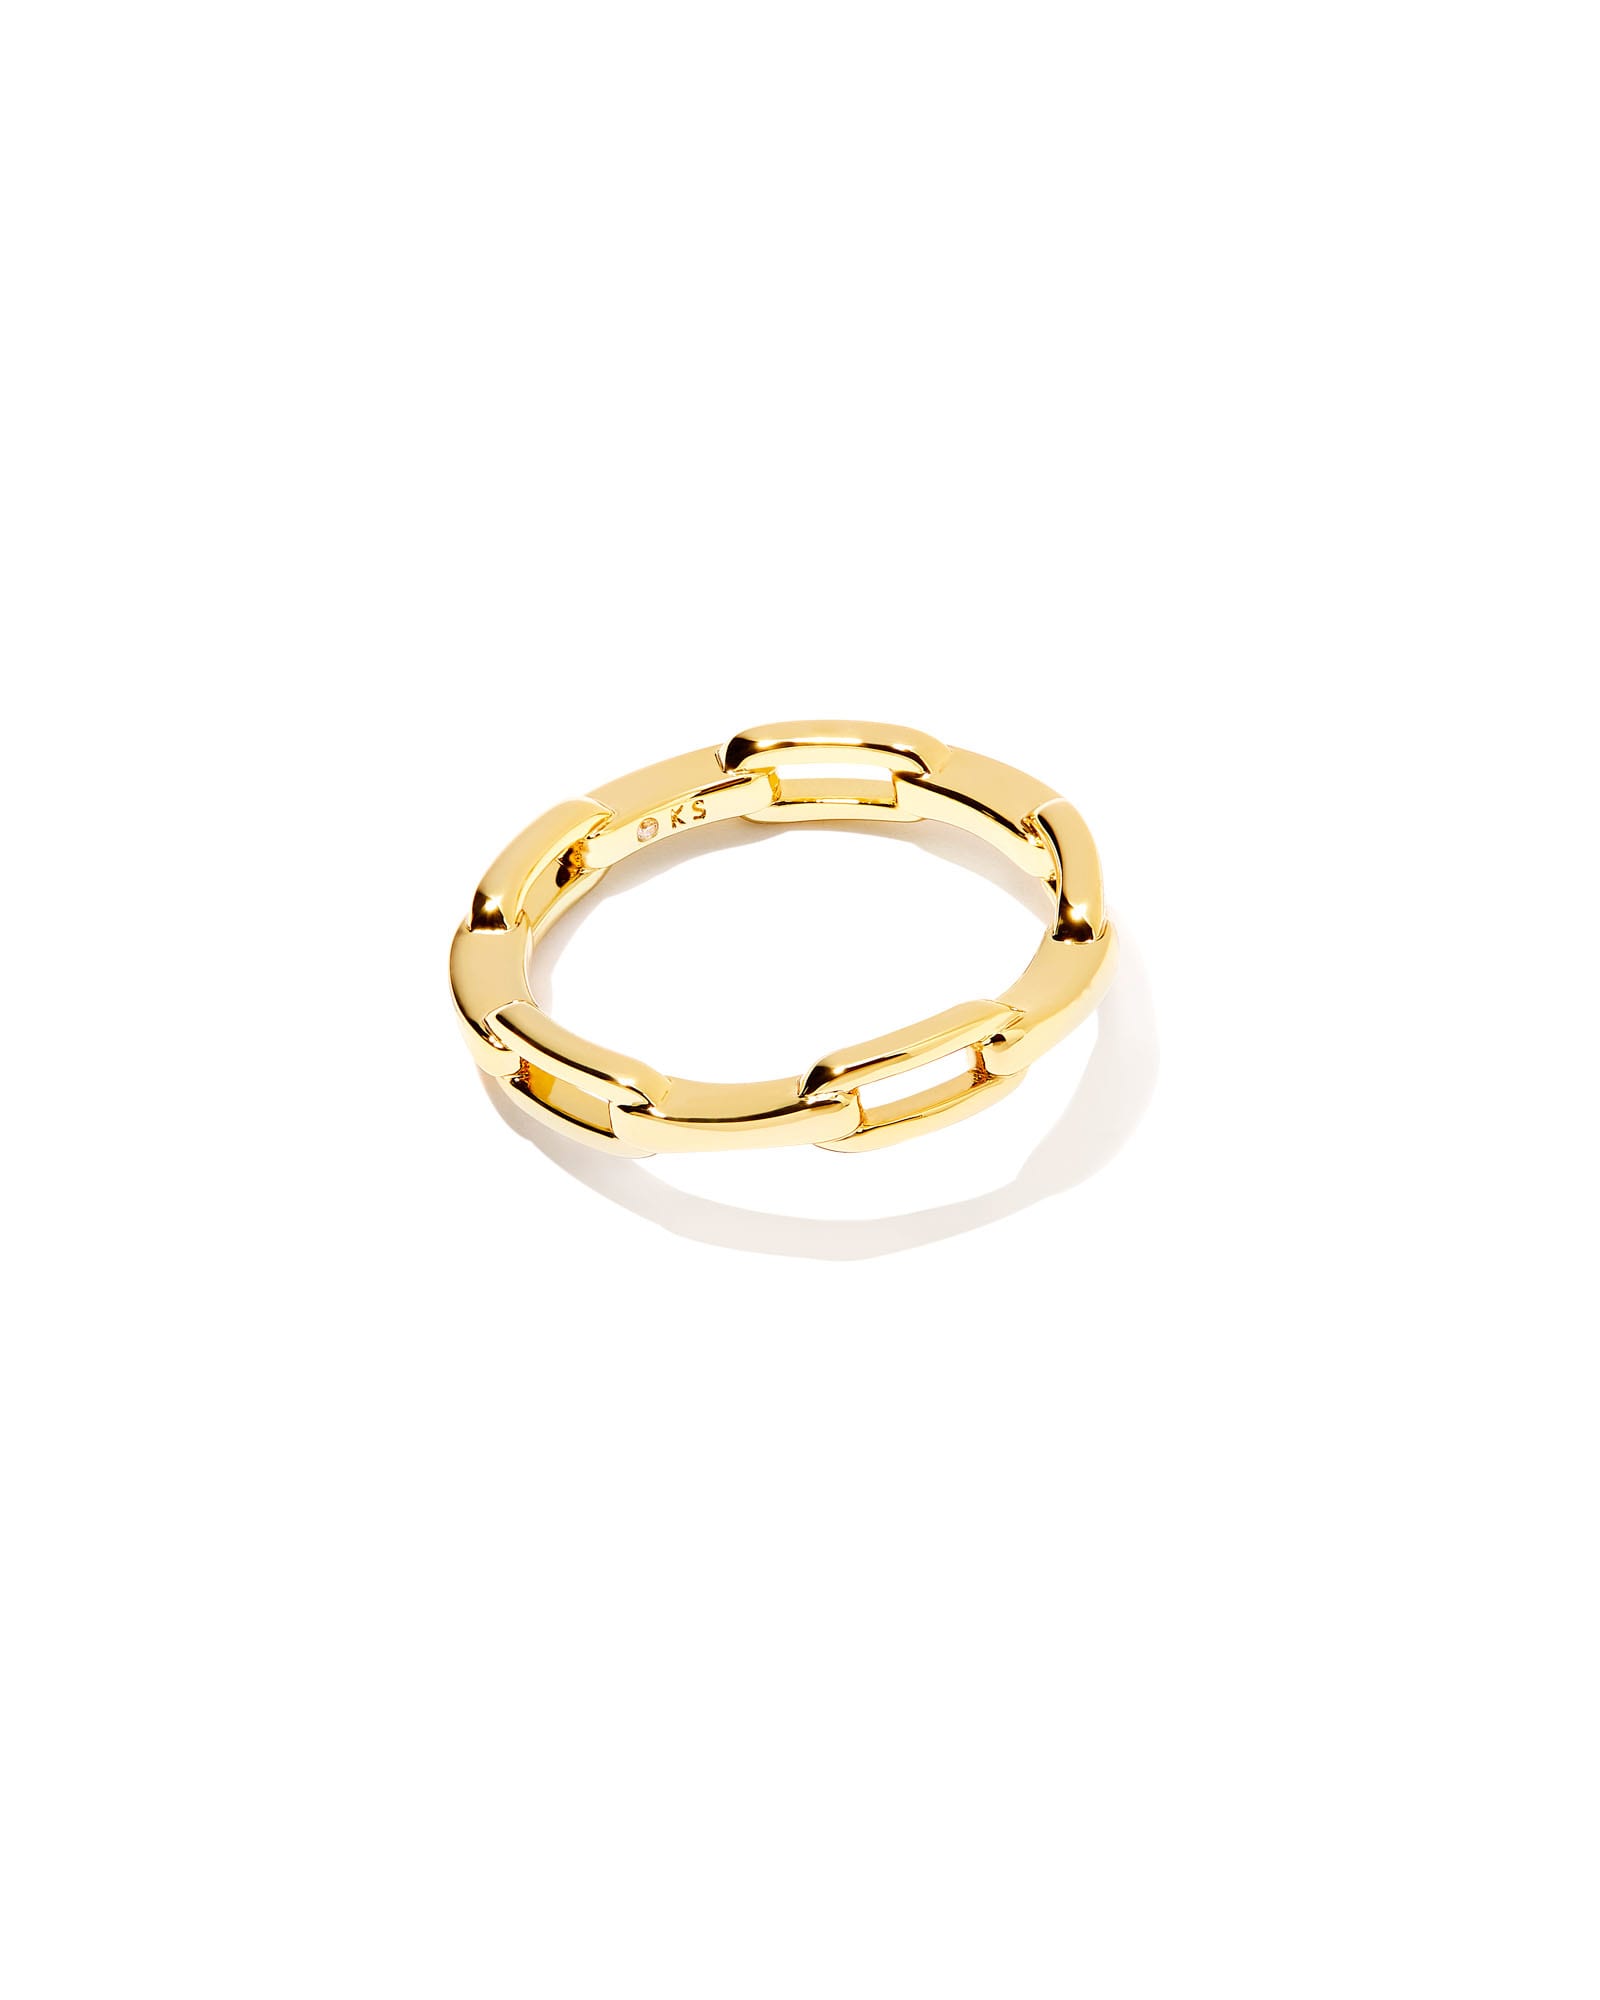 Kendra Scott Andi Band Ring in Gold | Plated Brass